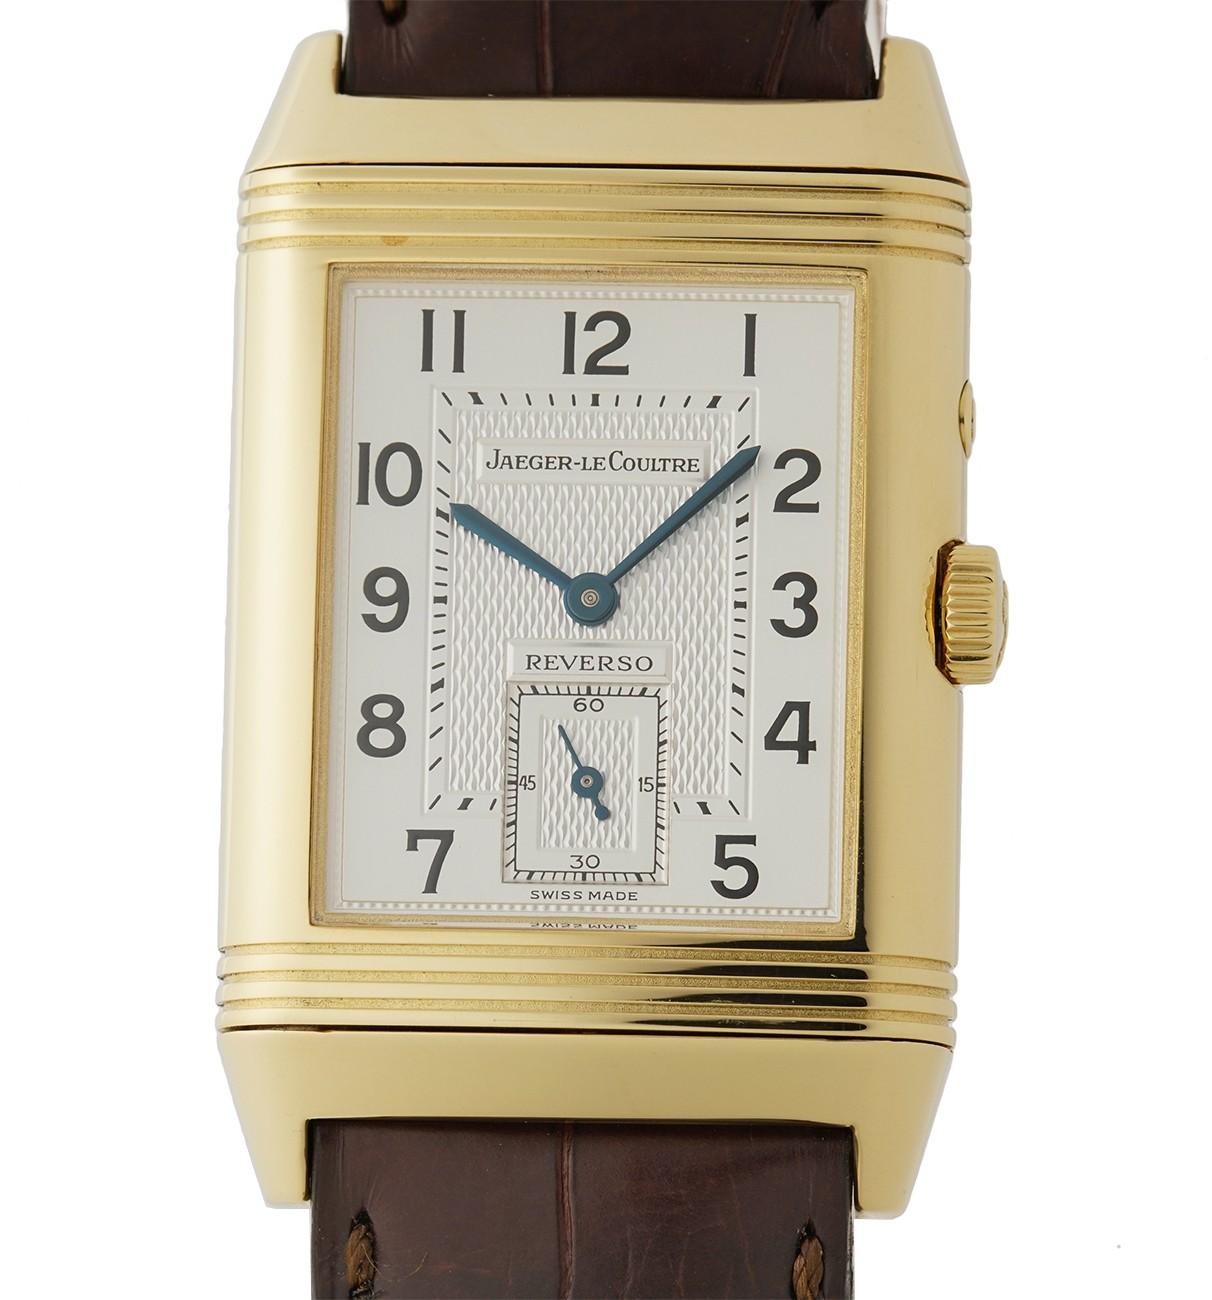 Jaeger-LeCoultre Reverso 270.1.54, Silver Dial In Excellent Condition For Sale In Miami, FL